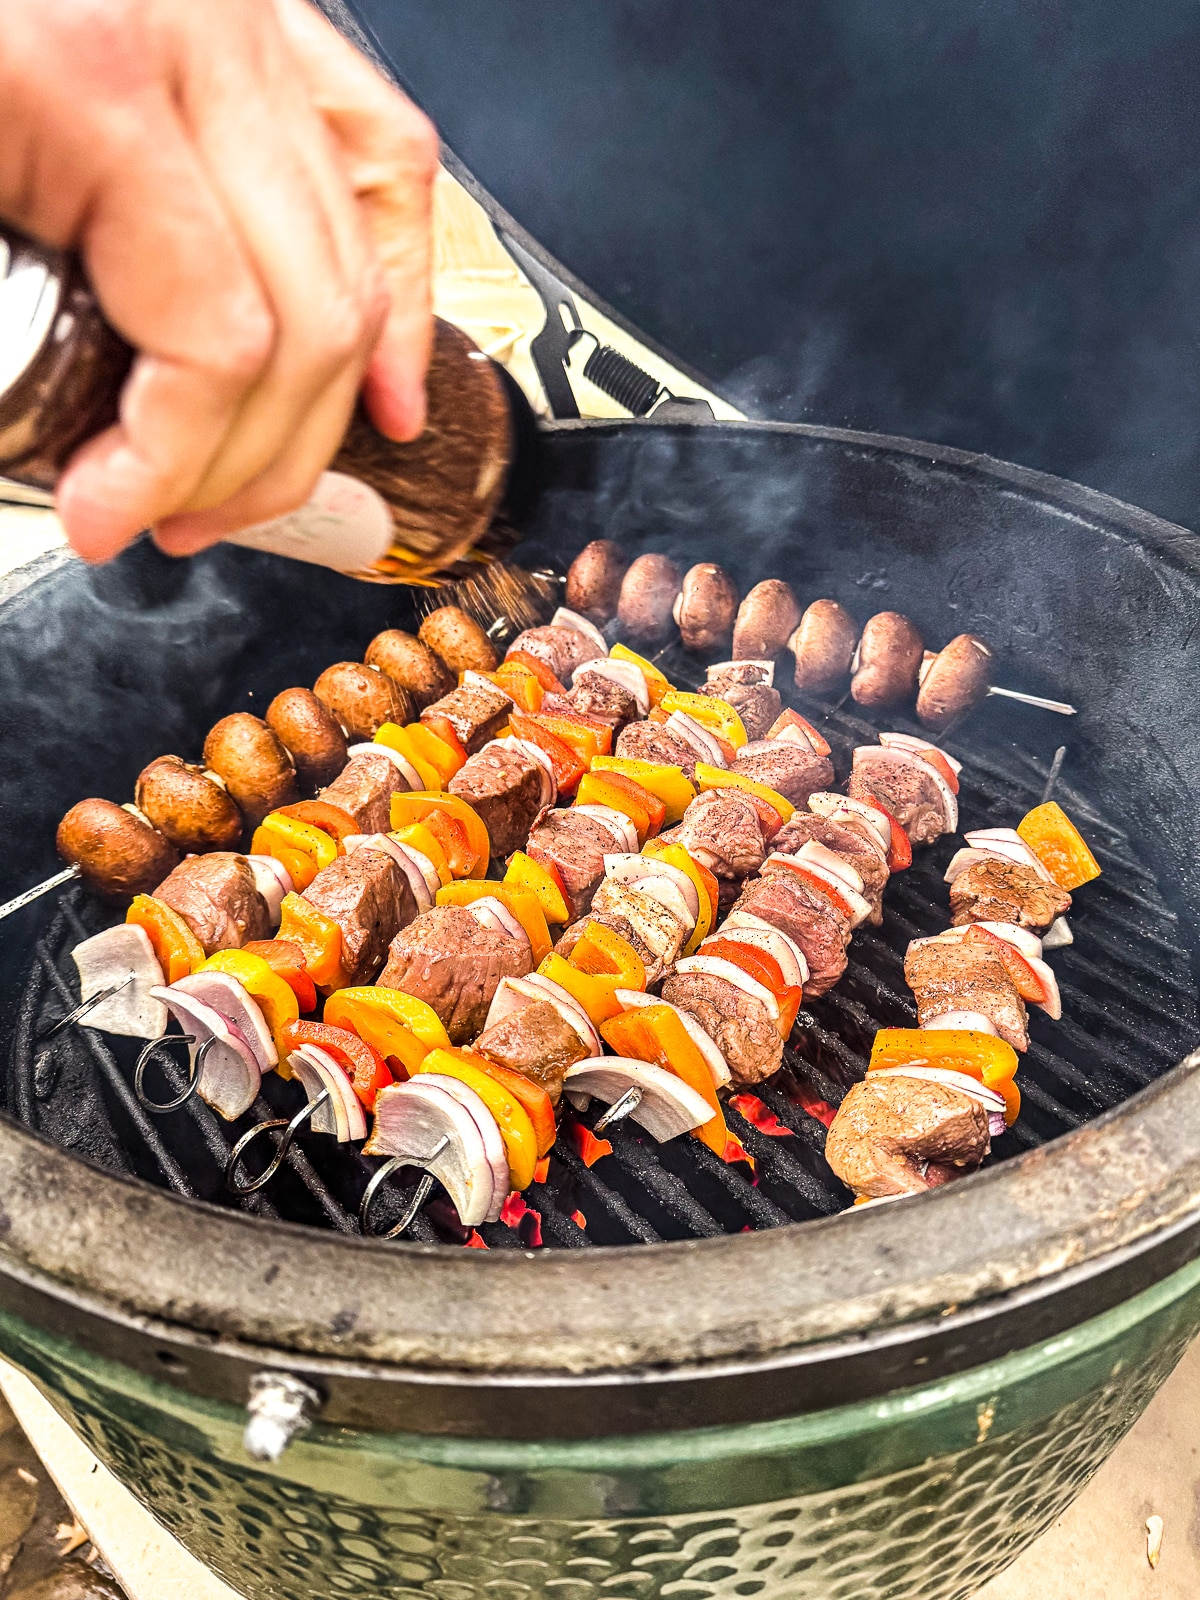 A grill with the beef kabobs and some seasoning being added.